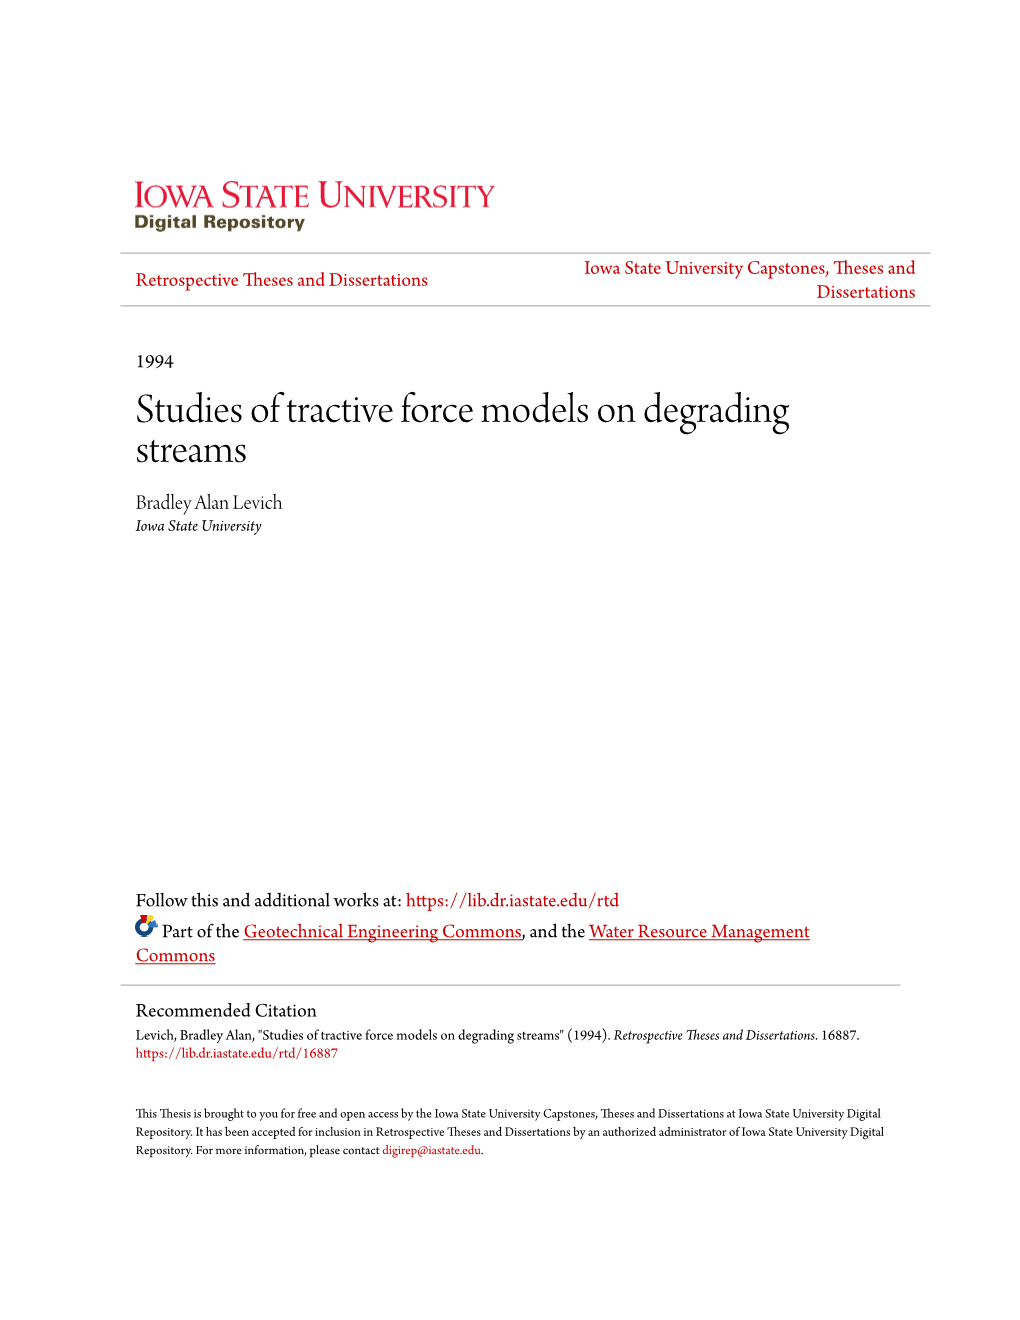 Studies of Tractive Force Models on Degrading Streams Bradley Alan Levich Iowa State University